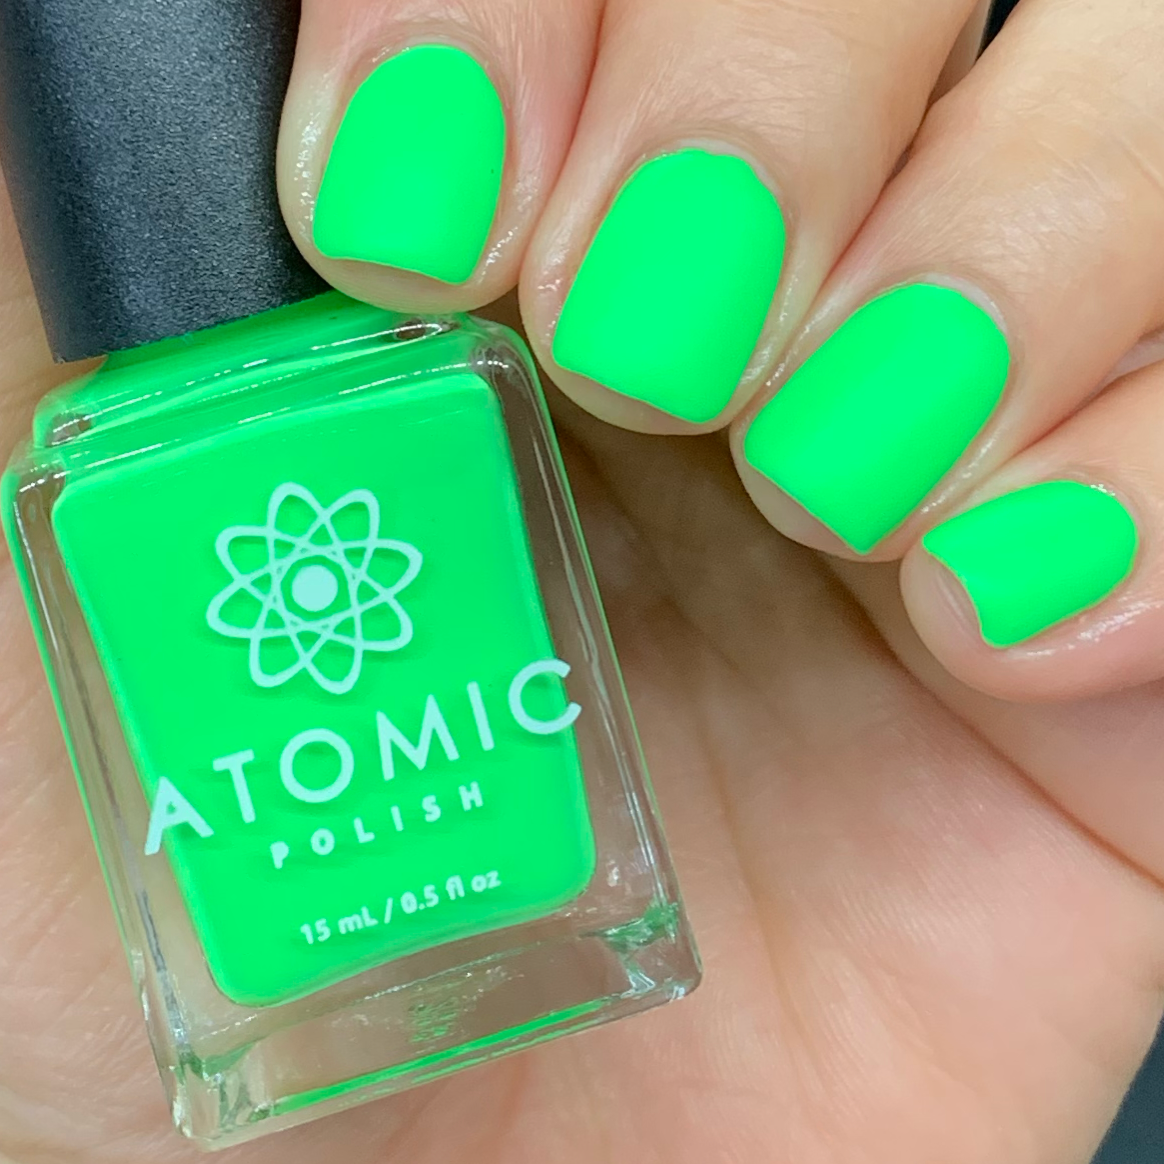 The Best Neon Nail Designs 2023